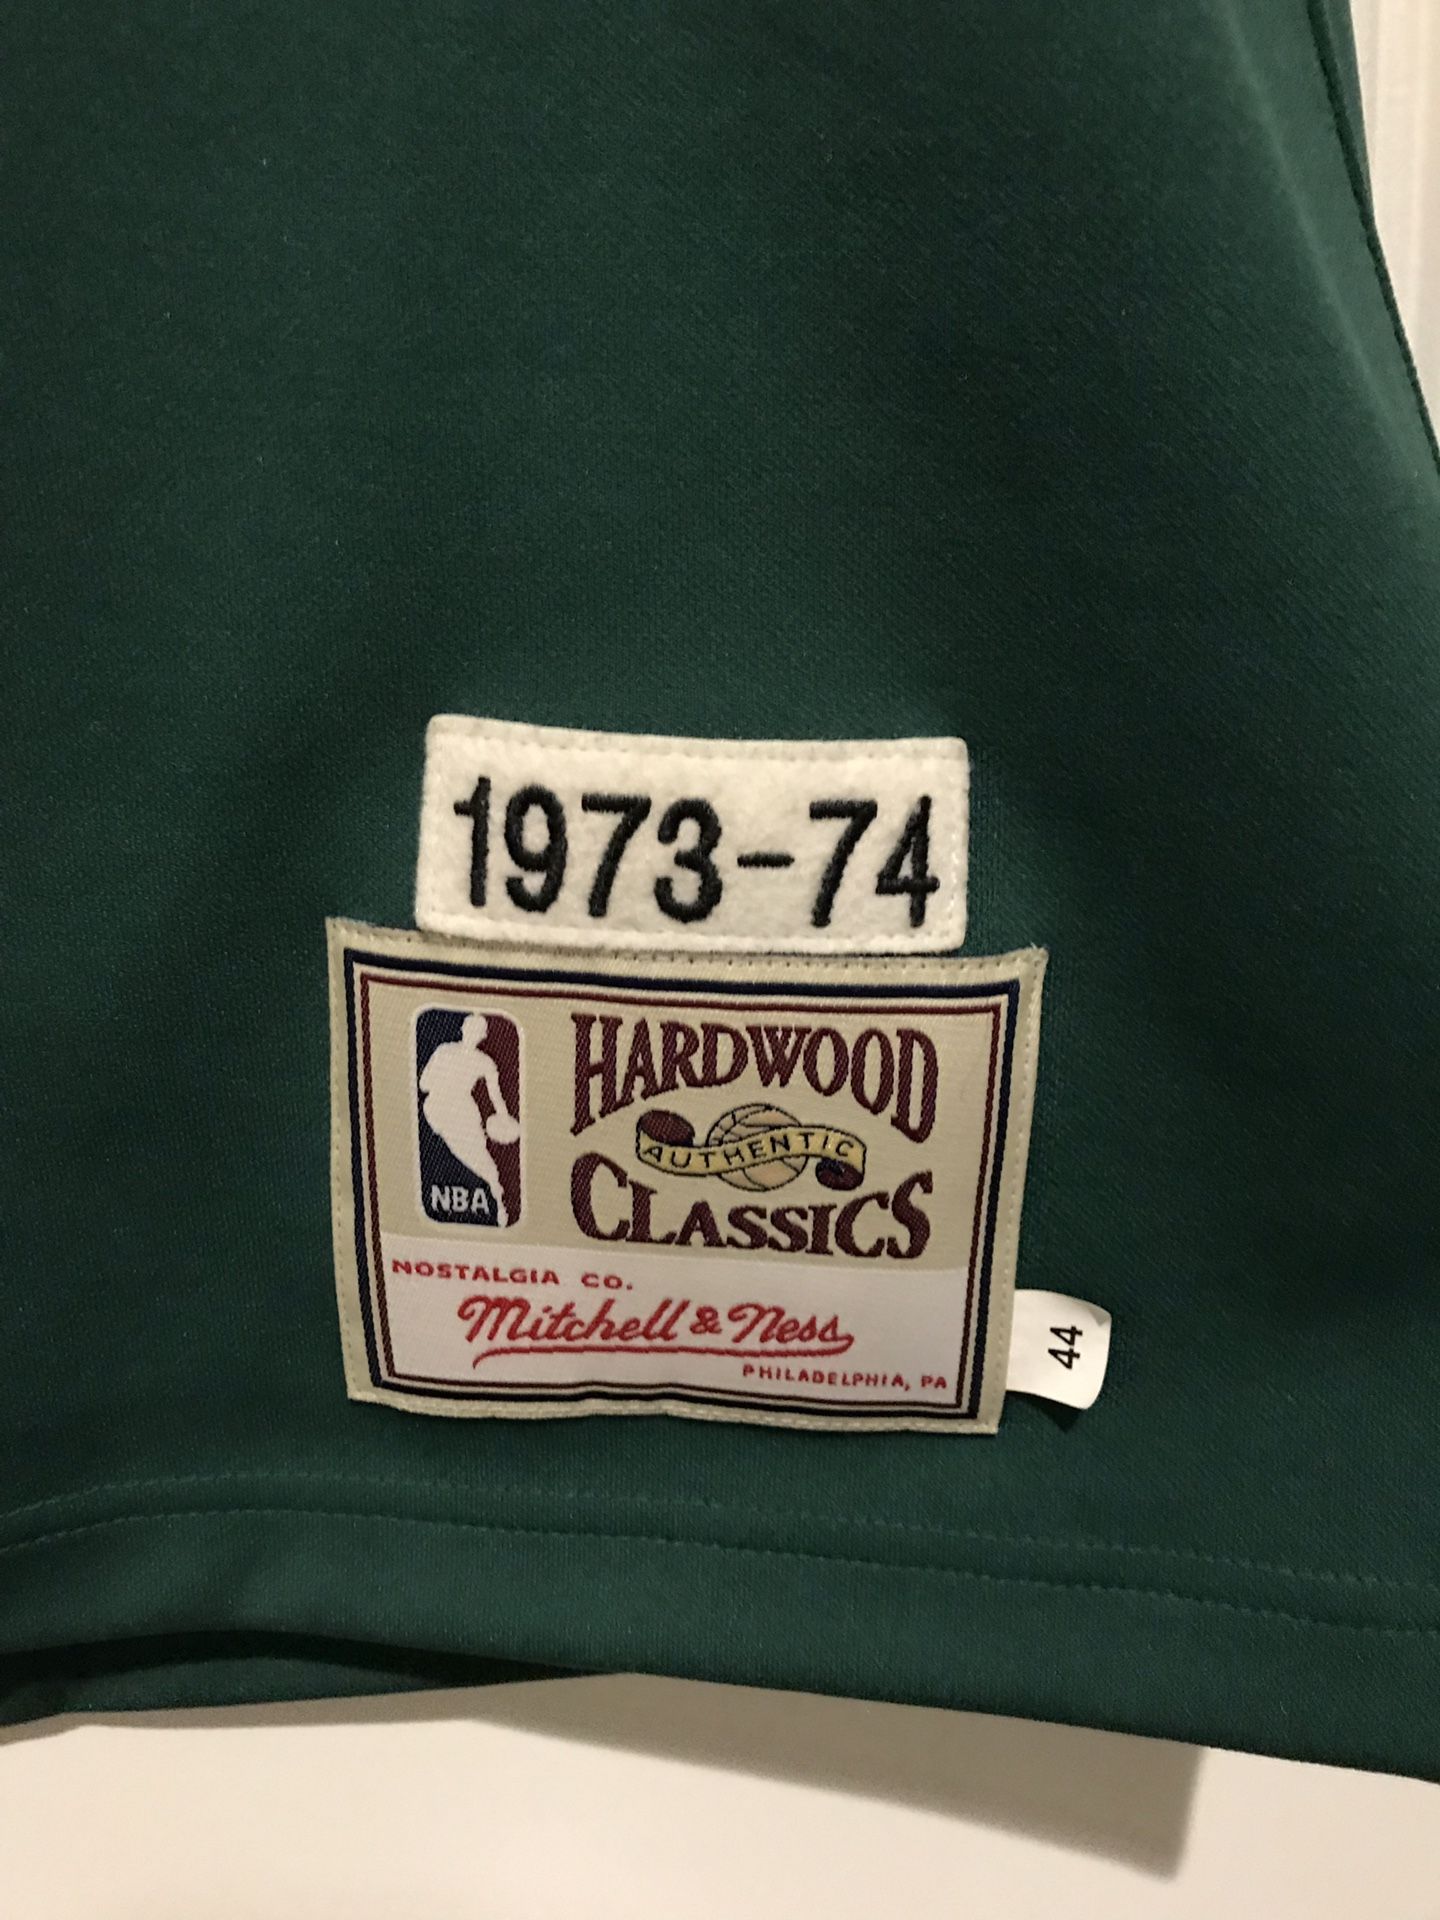 Jersey for the Milwaukee Bucks worn and signed by Kareem Abdul-Jabbar,  1973-1975 – Sapelo Square